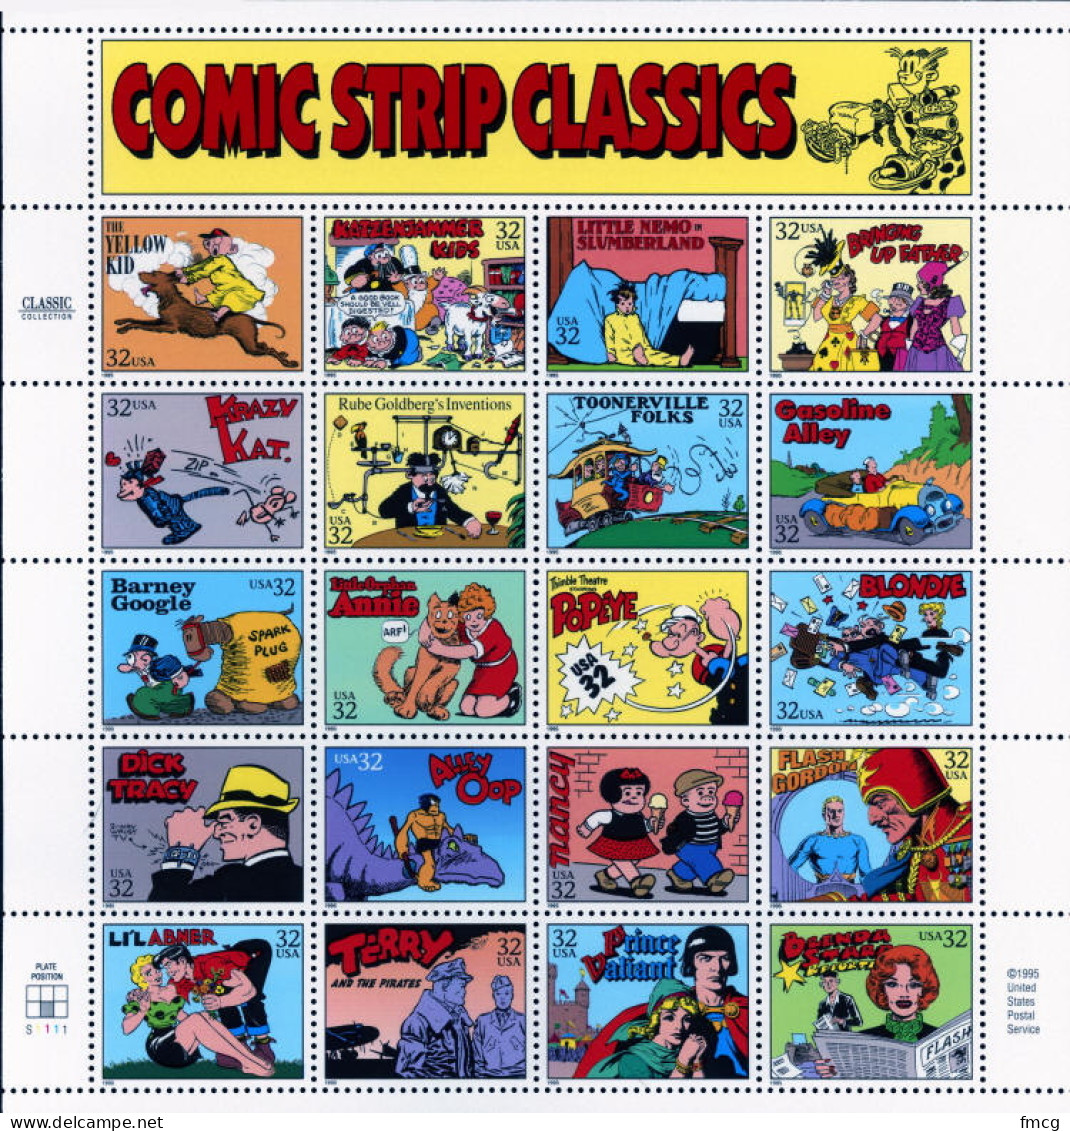 1995 Comic Strip Classics - Sheet Of 20, Mint Never Hinged - Unused Stamps